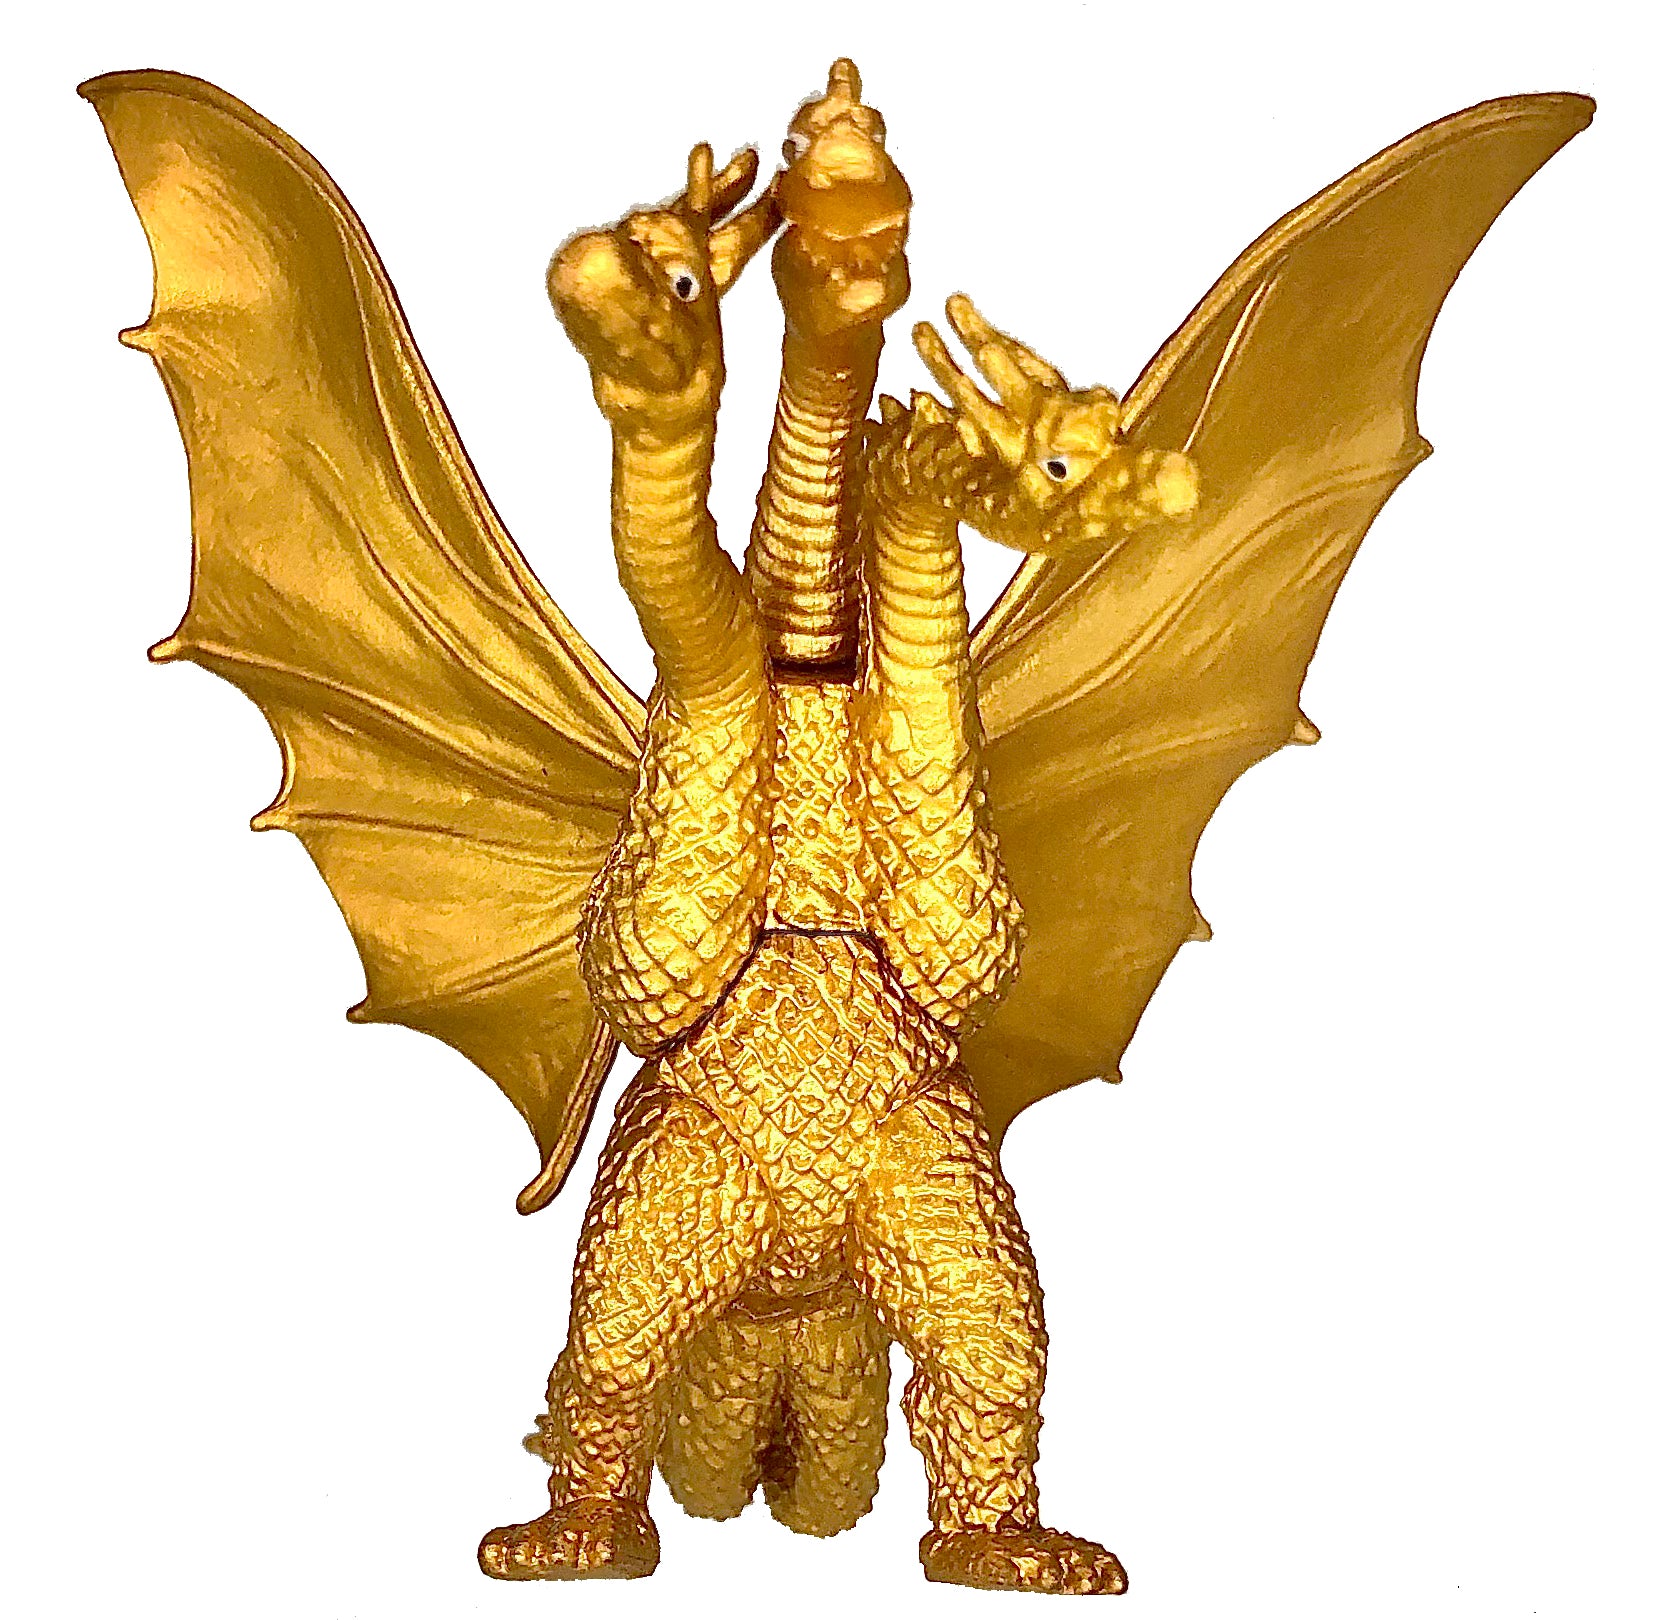 2021 8pcs King Kong vs Godzilla Toys Movable Joint Action Figures King of The Monsters Ghidorah Birthday Kid Gift Cake Toppers